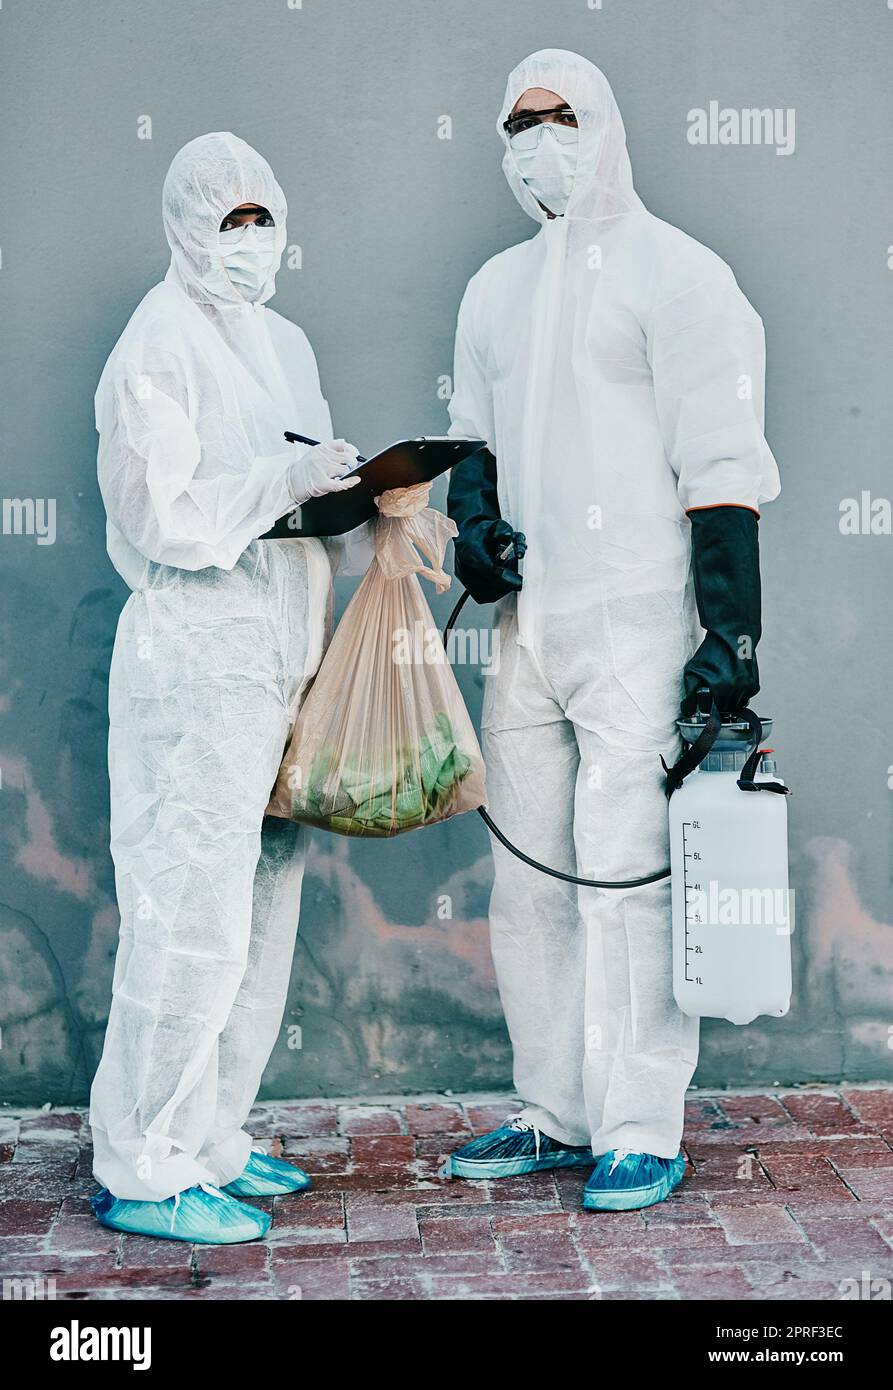 Scientists disinfect isolated and dangerous area. Medical staff protect themselves with sterile equipment. Healthcare workers clean while wearing safety uniform to stop the spread of a virus. Stock Photo